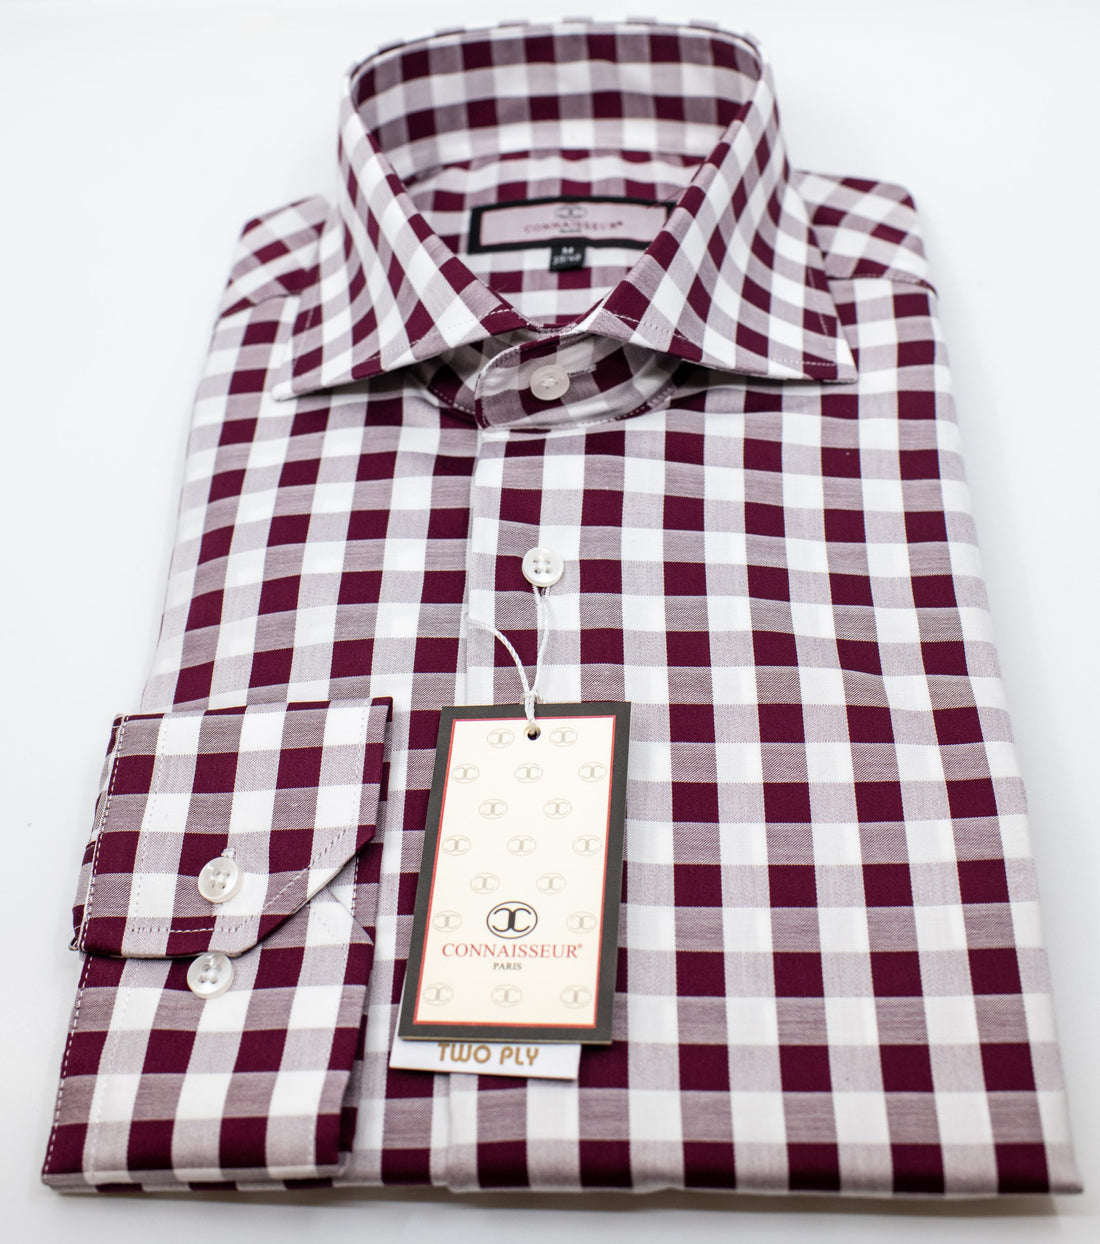 Burgundy and white Gingham check spread collar two ply cotton slim fit dress shirt